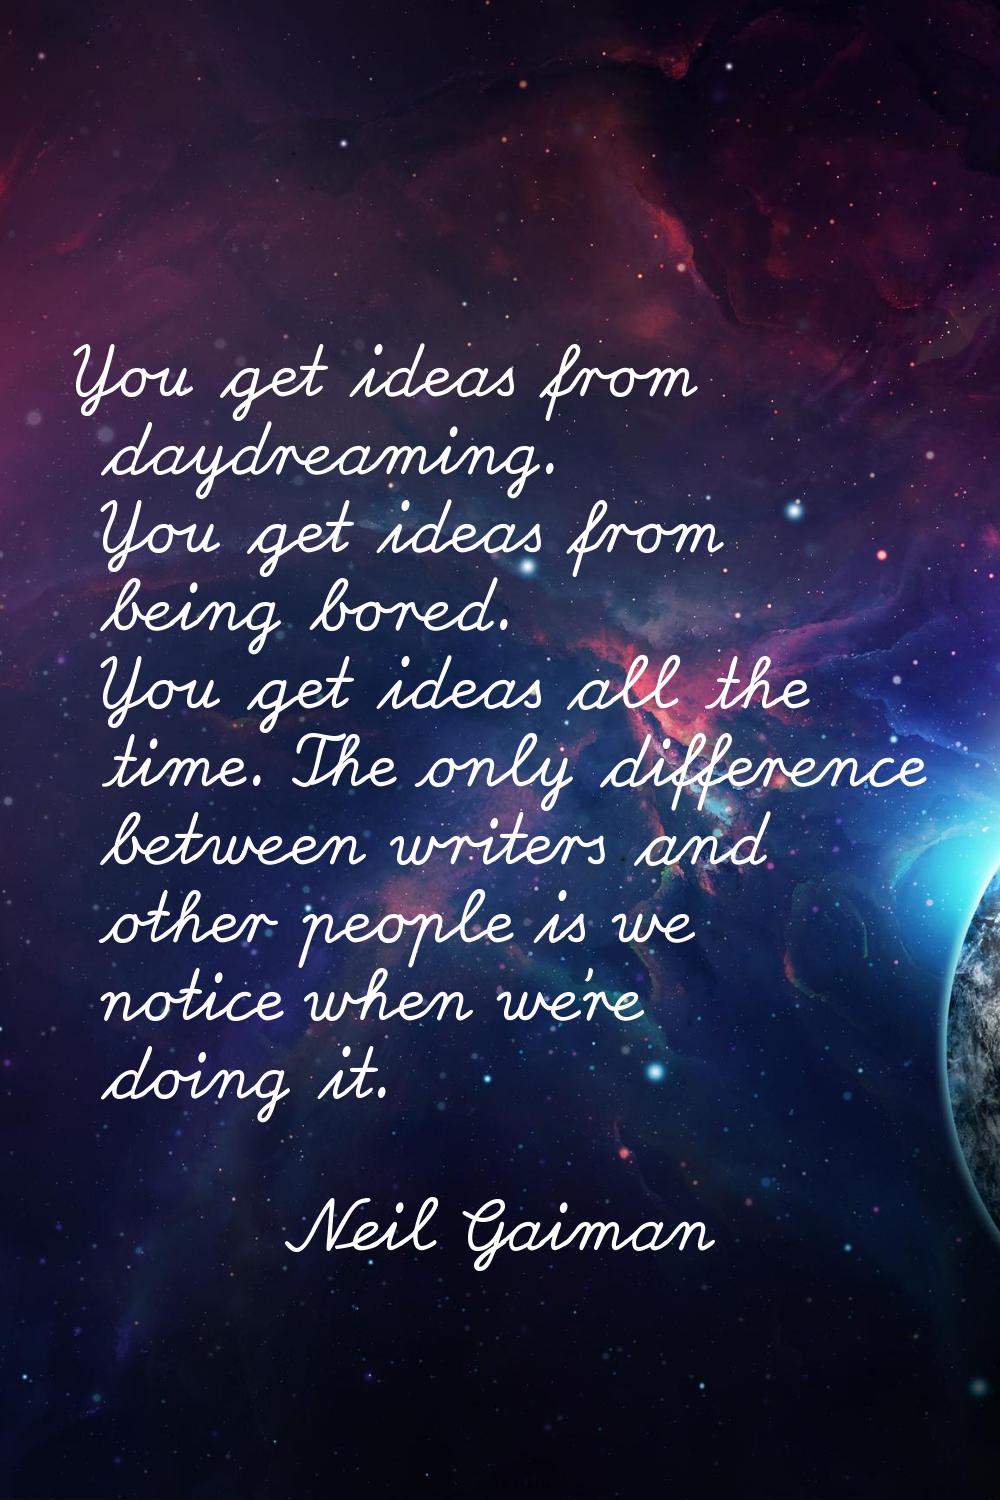 You get ideas from daydreaming. You get ideas from being bored. You get ideas all the time. The onl